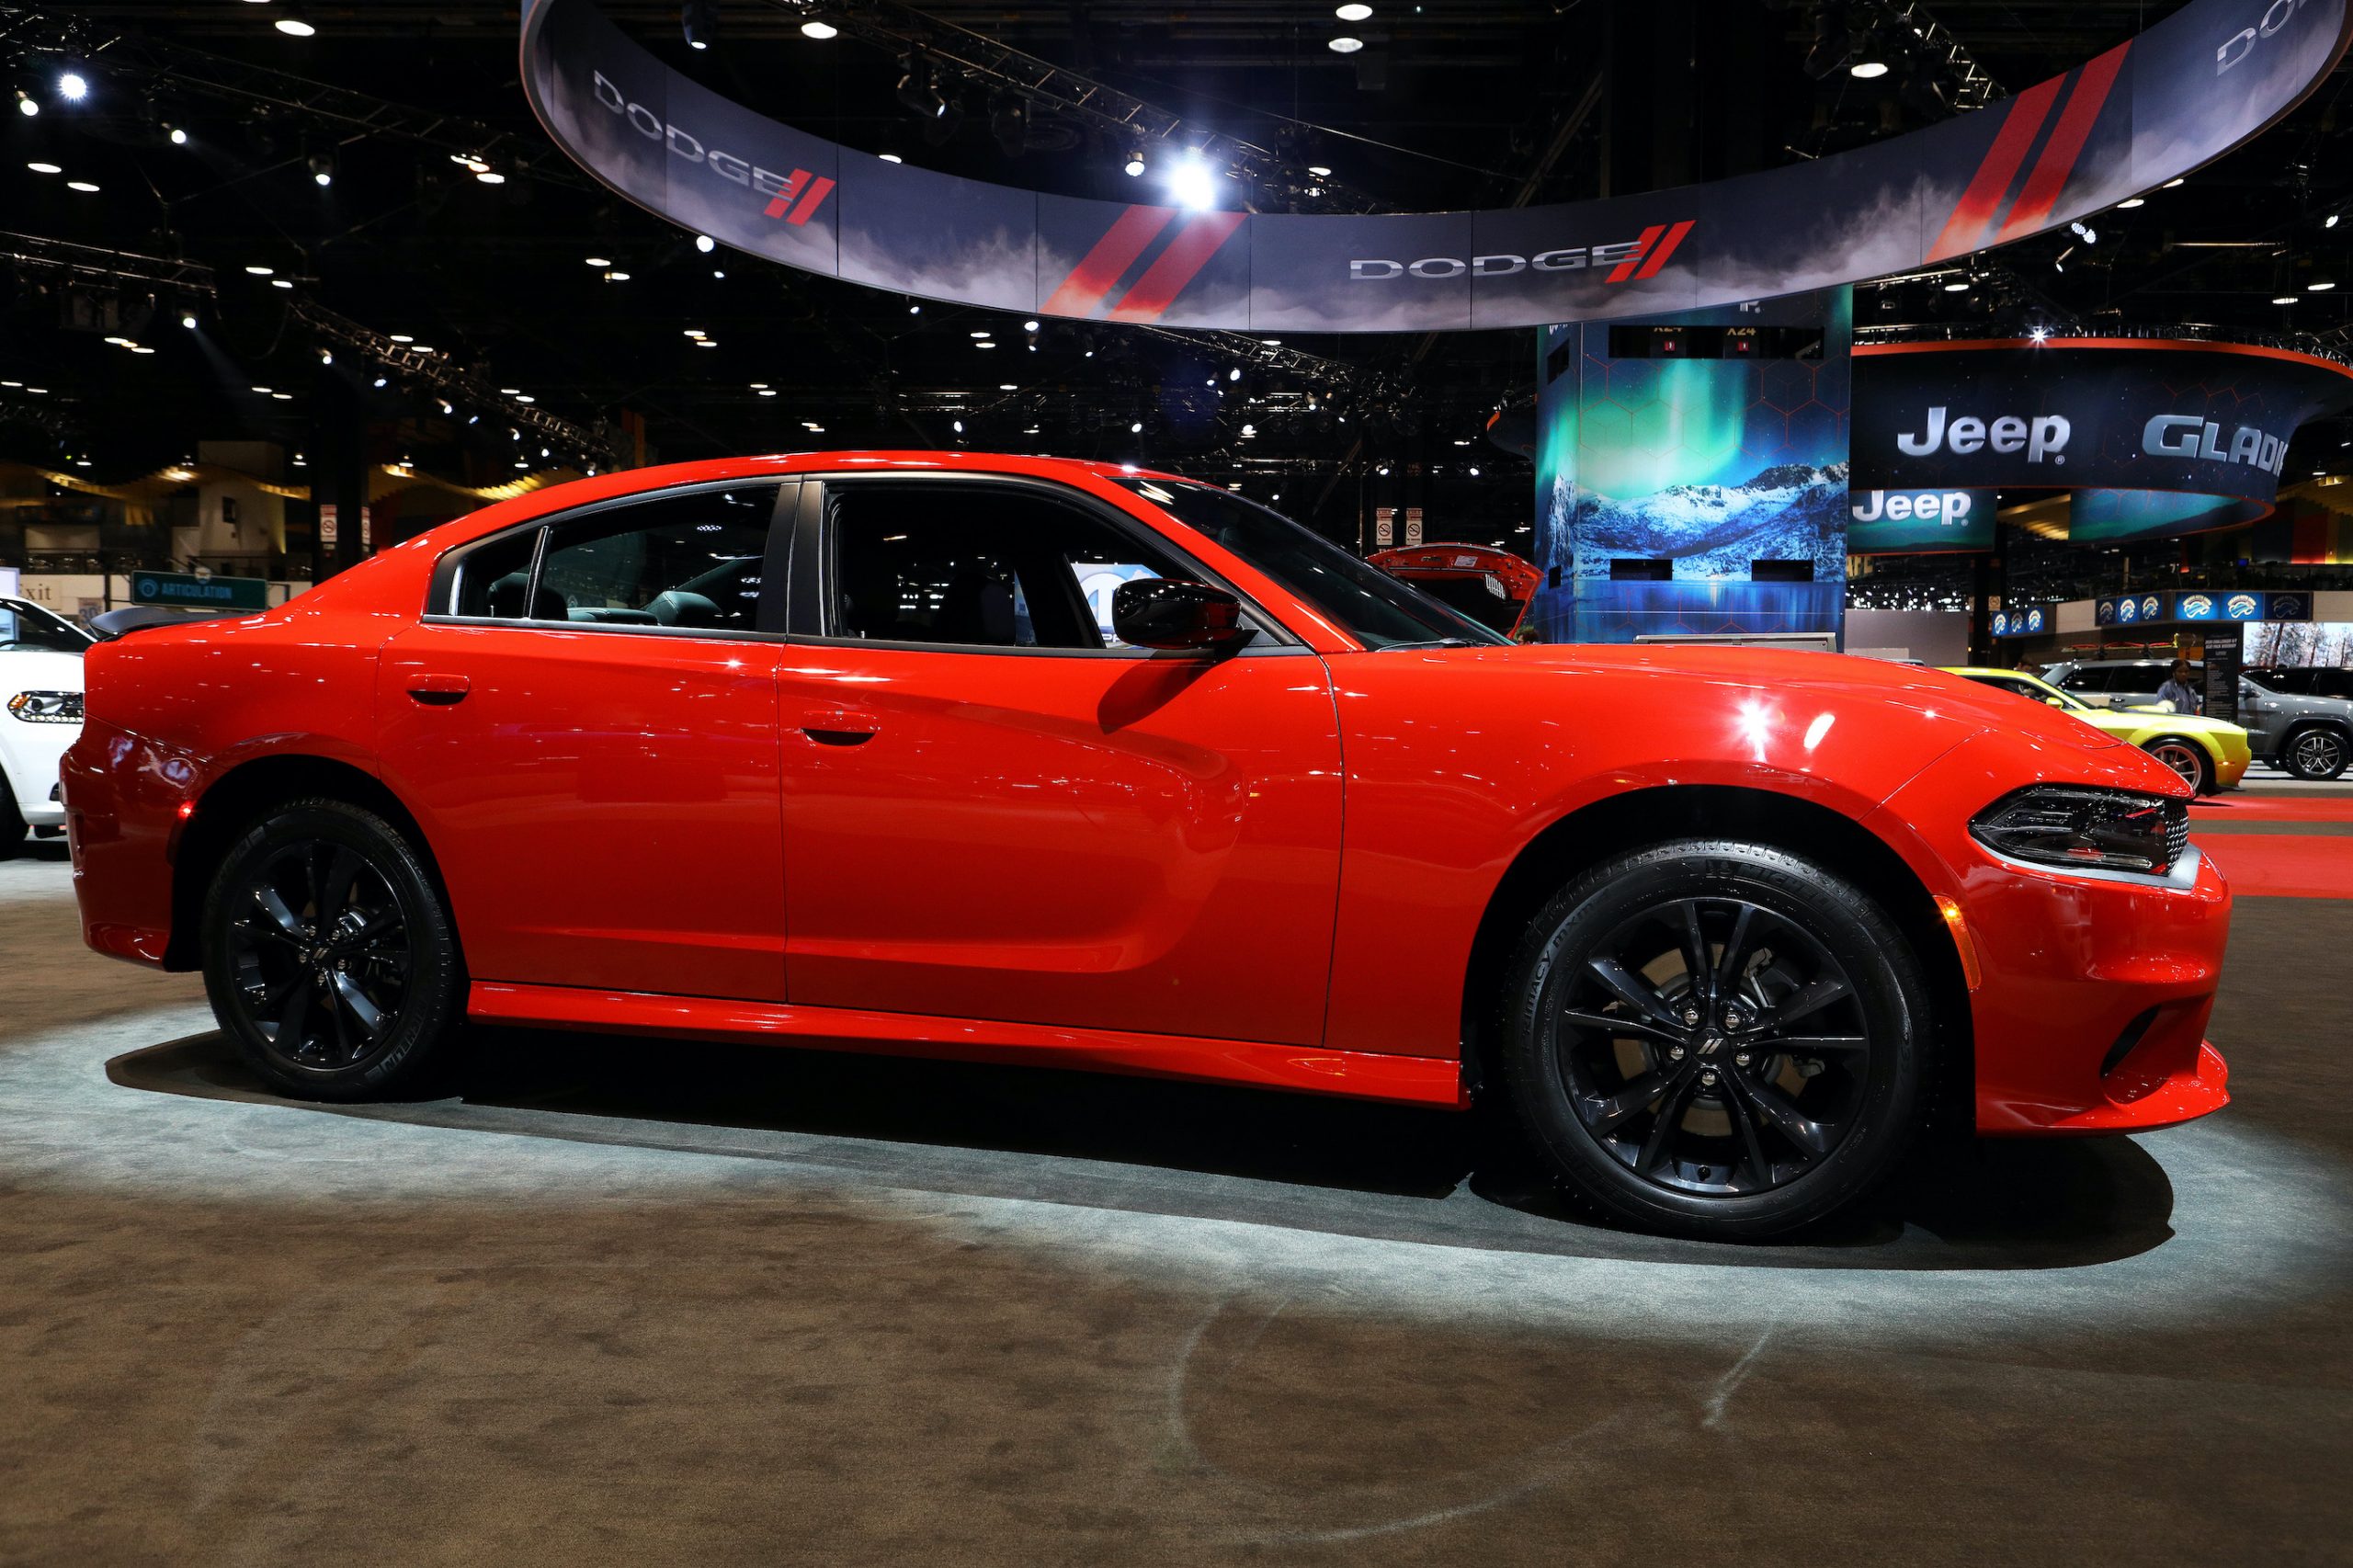 2020 Dodge Charger is on display at the 112th Annual Chicago Auto Show